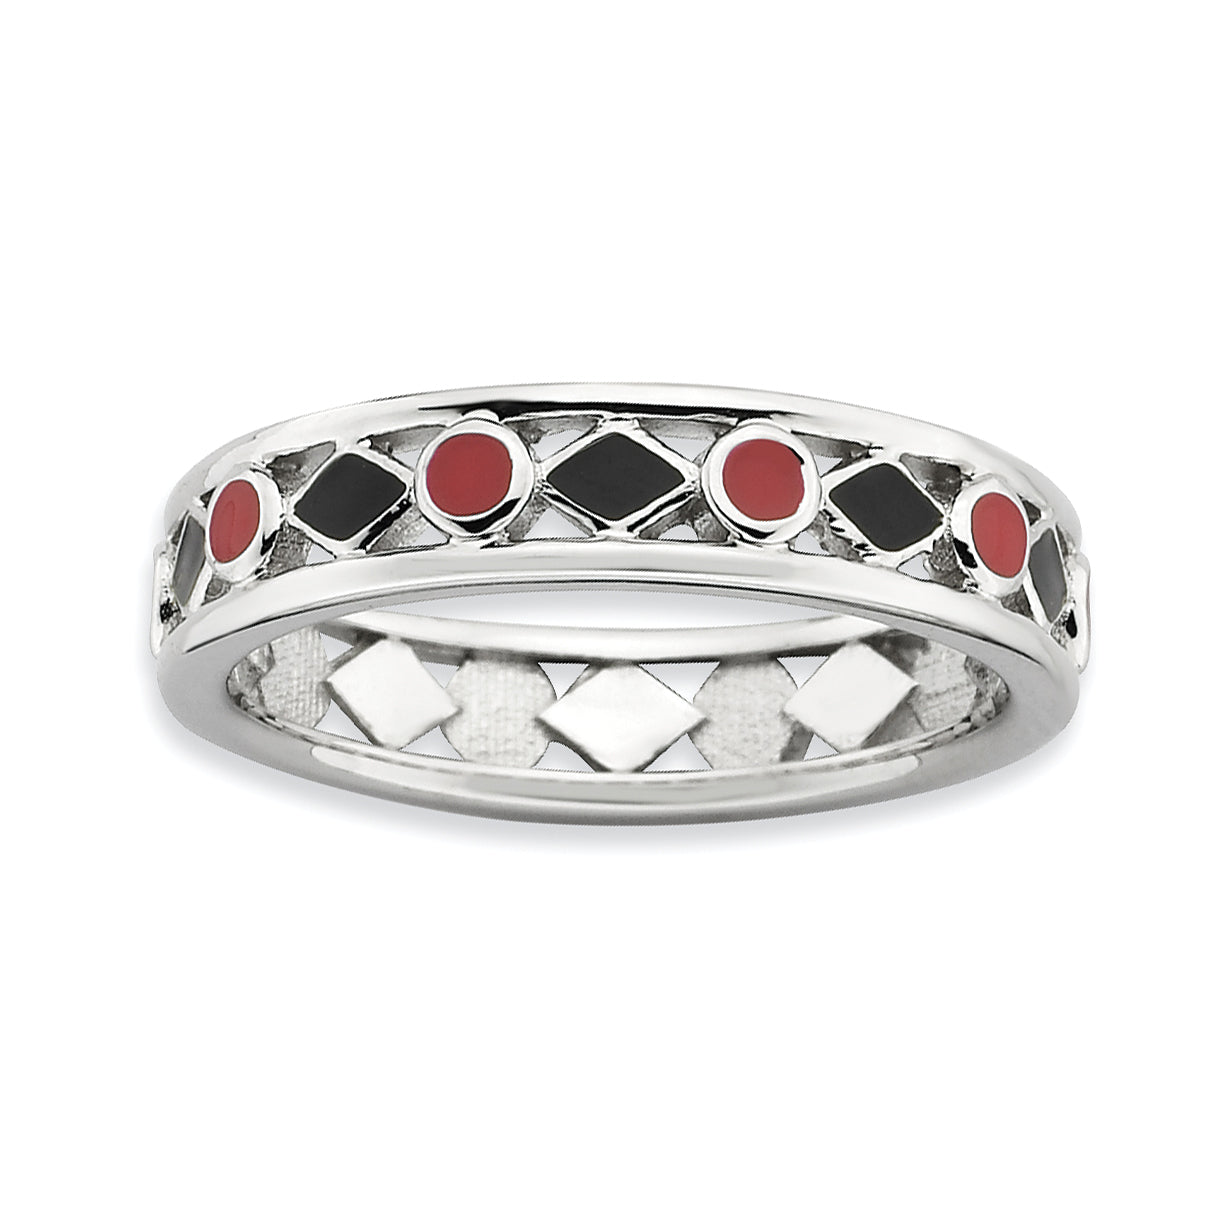 Sterling Silver Stackable Expressions Polished Black/Red Enameled Ring